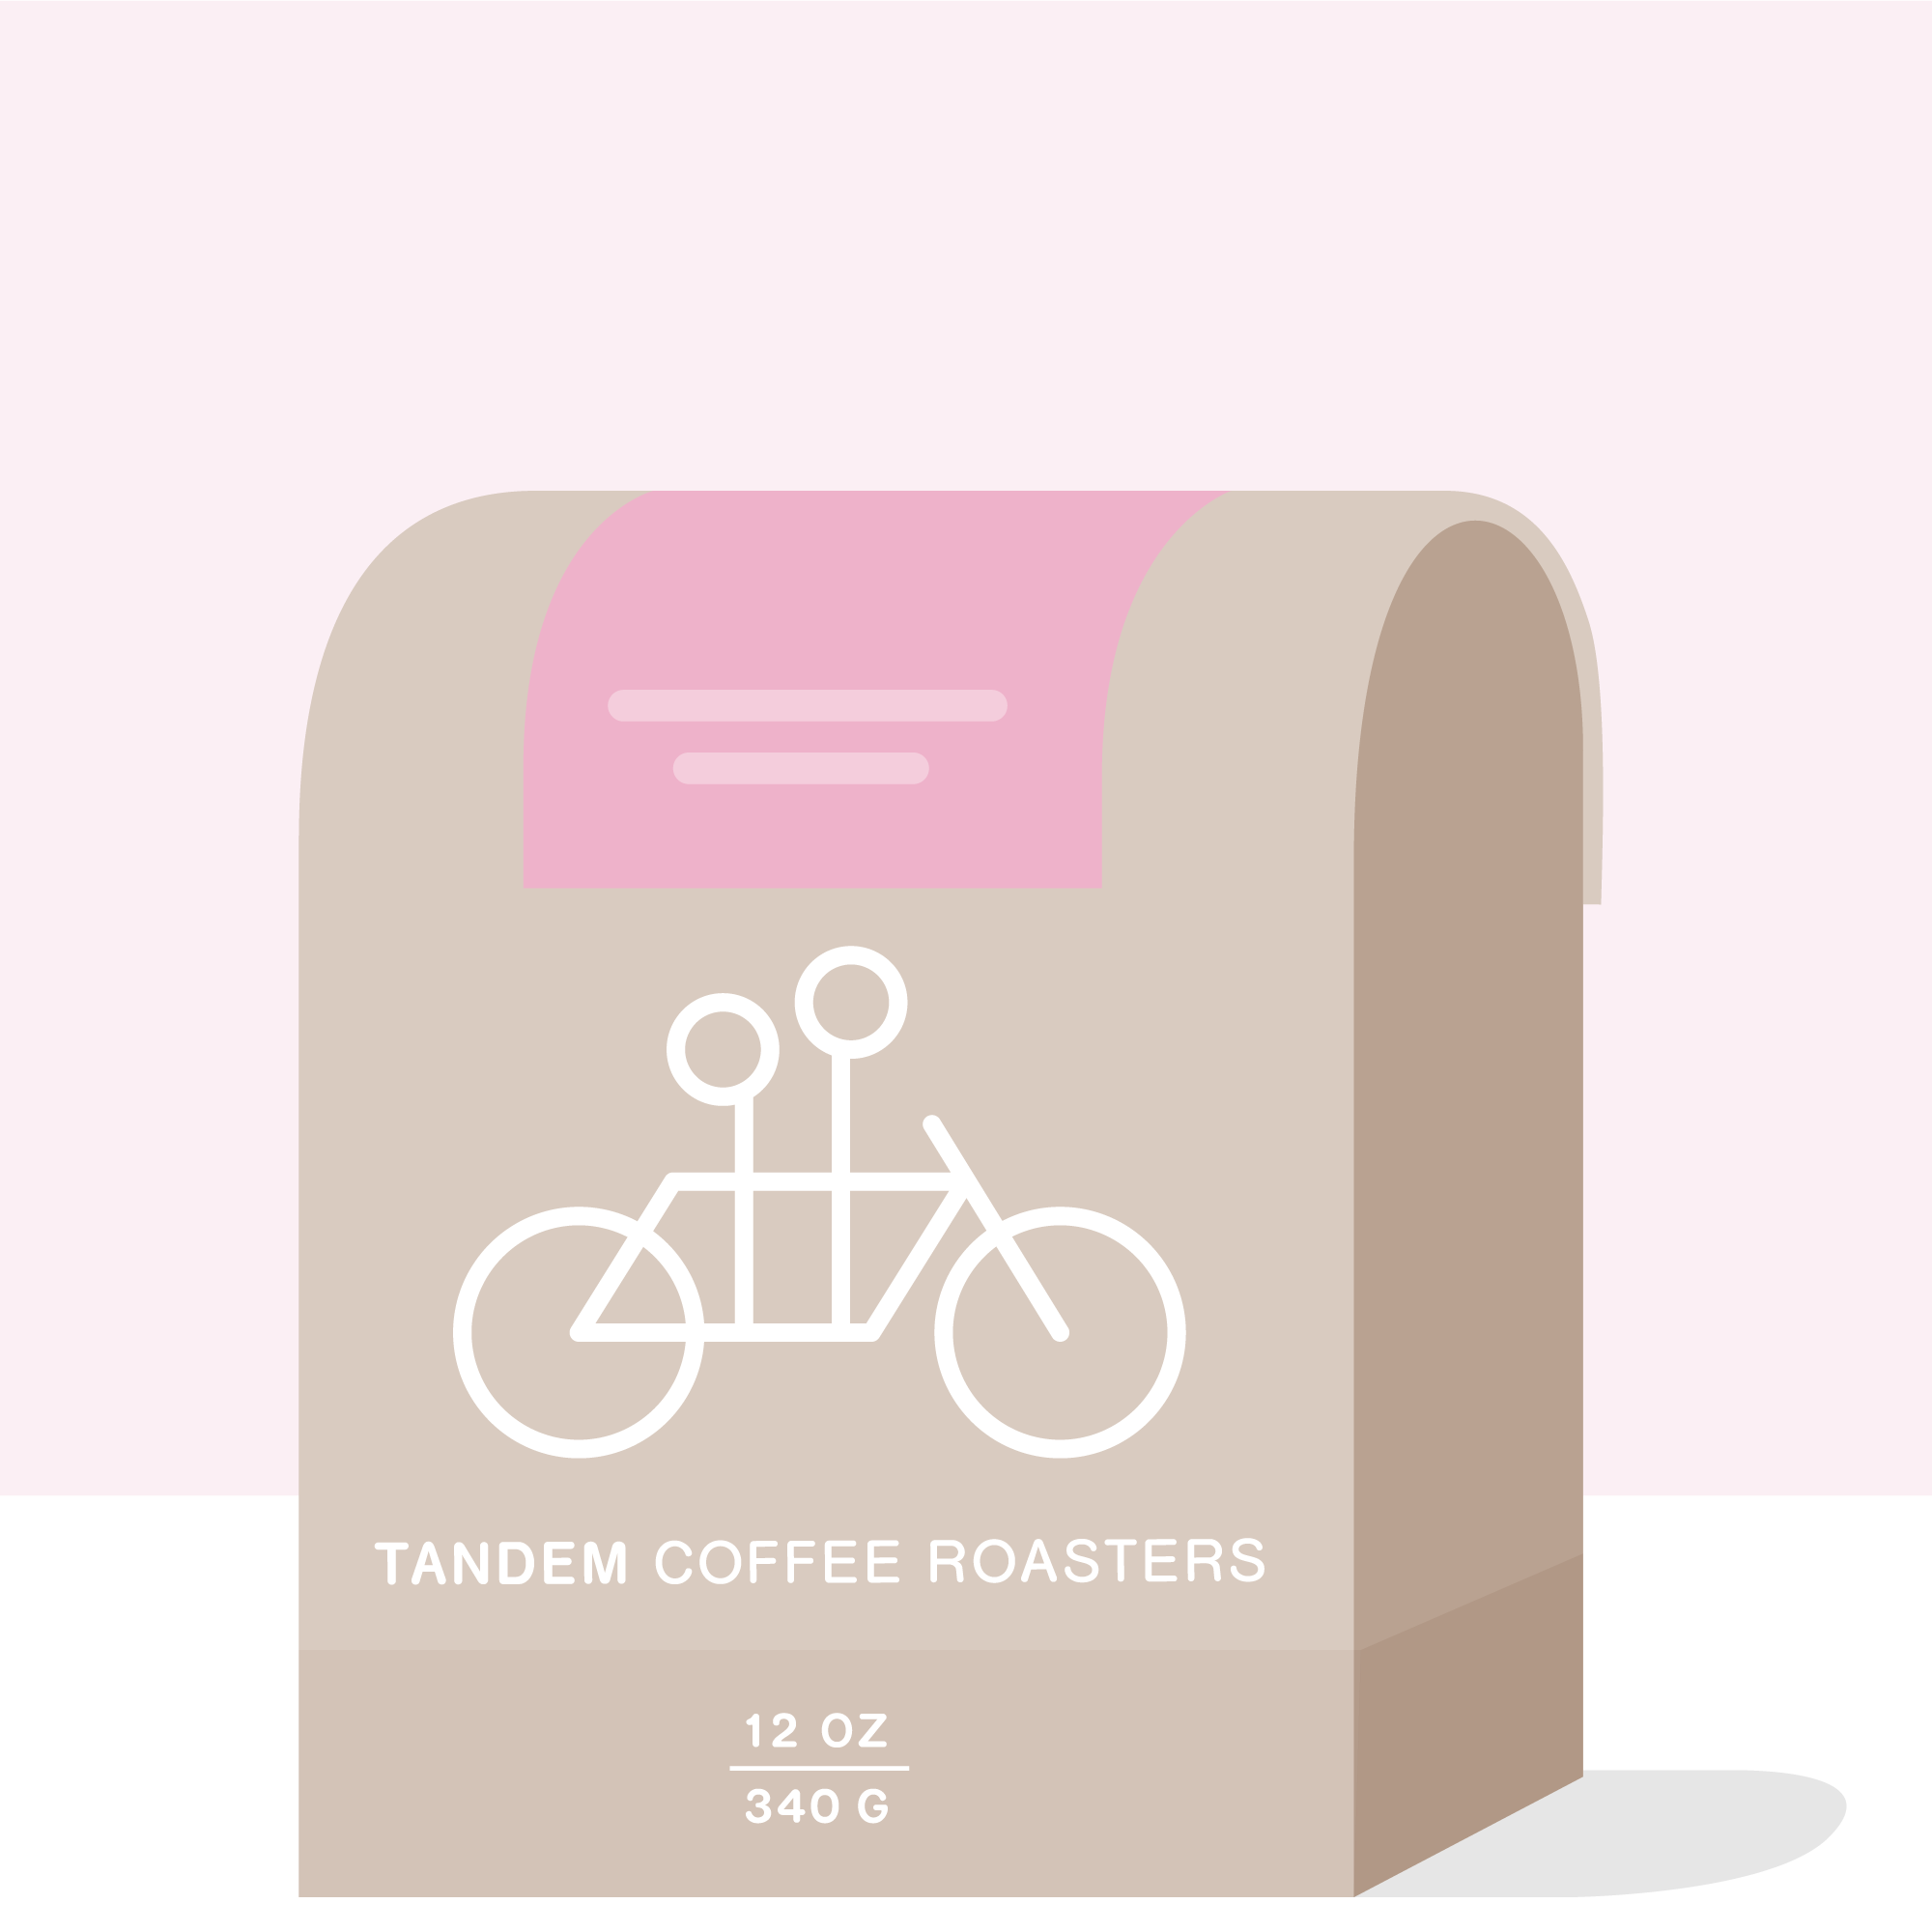 Illustration of a beige Miraflores - Ecuador coffee bag from Tandem Coffee Roasters featuring a simple white line drawing of a tandem bicycle. The background is pink, and the bag contains 12 oz.